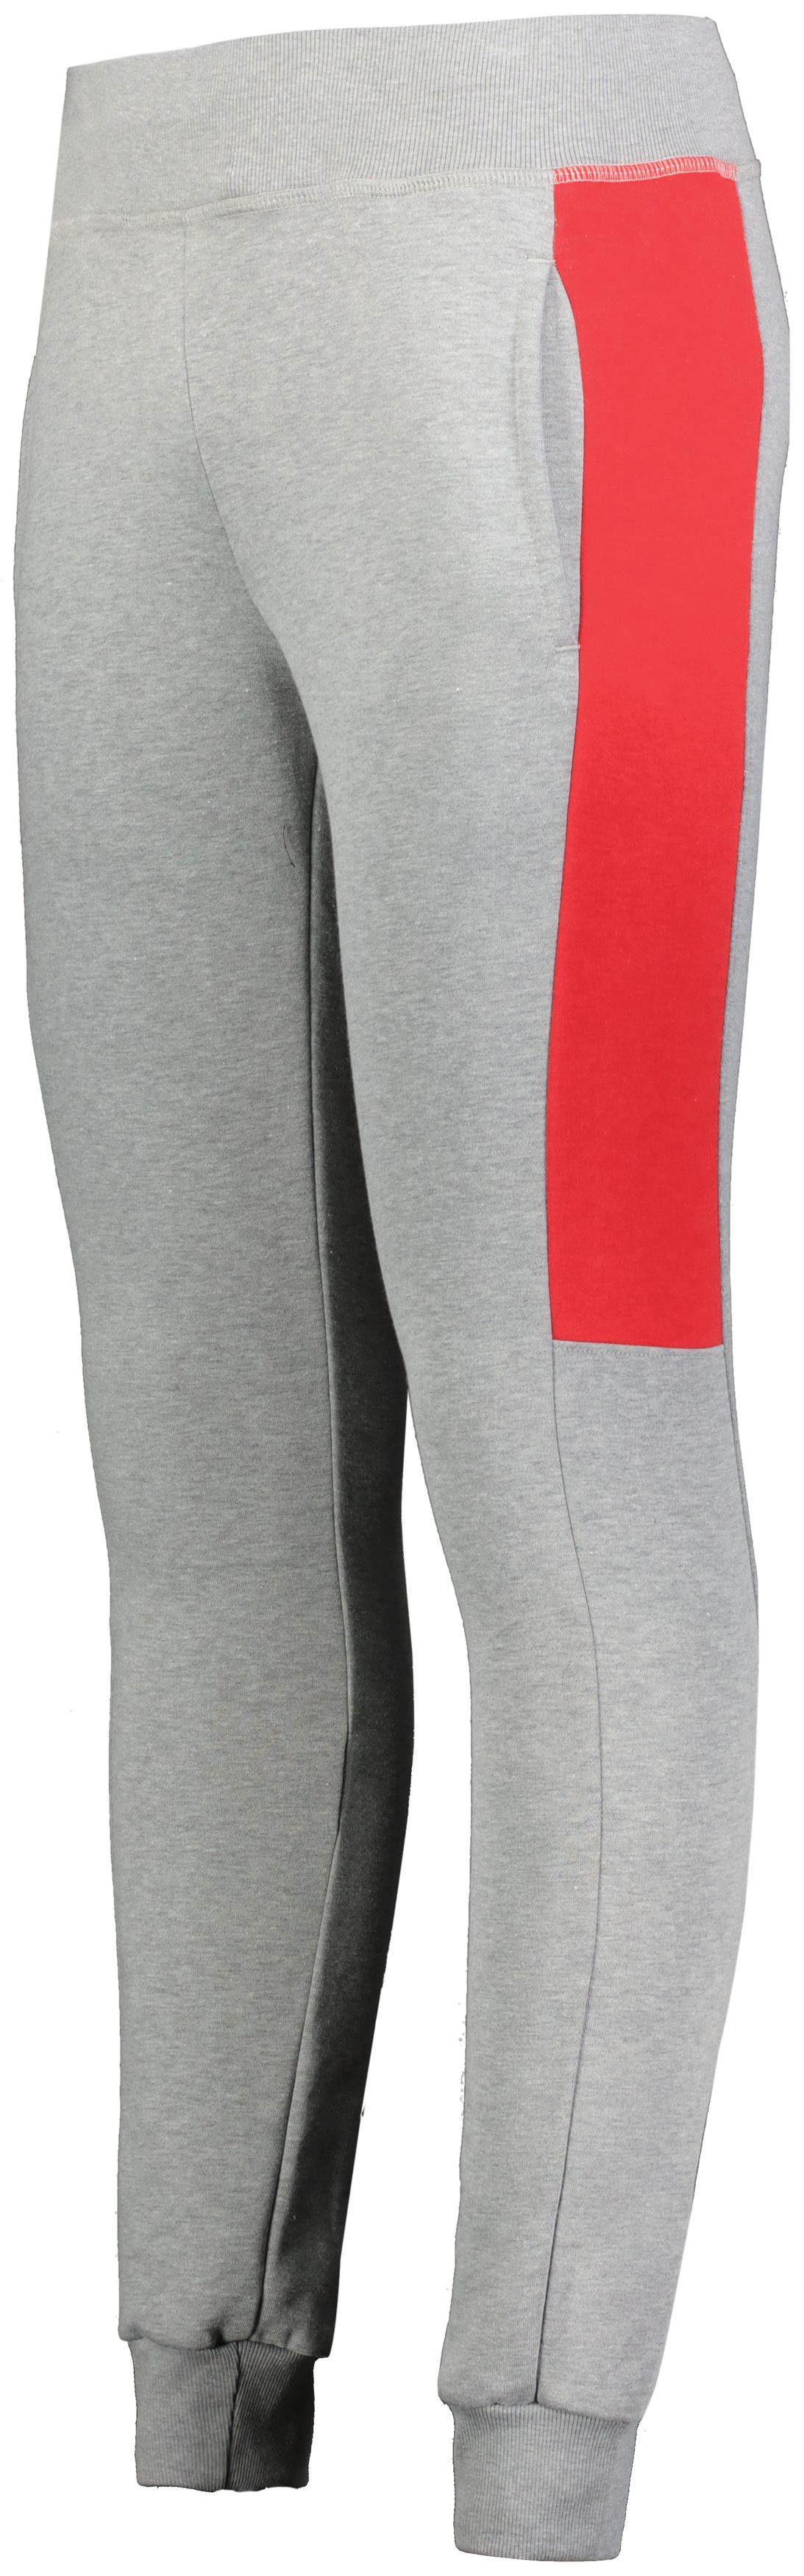 click to view Grey Heather/Scarlet